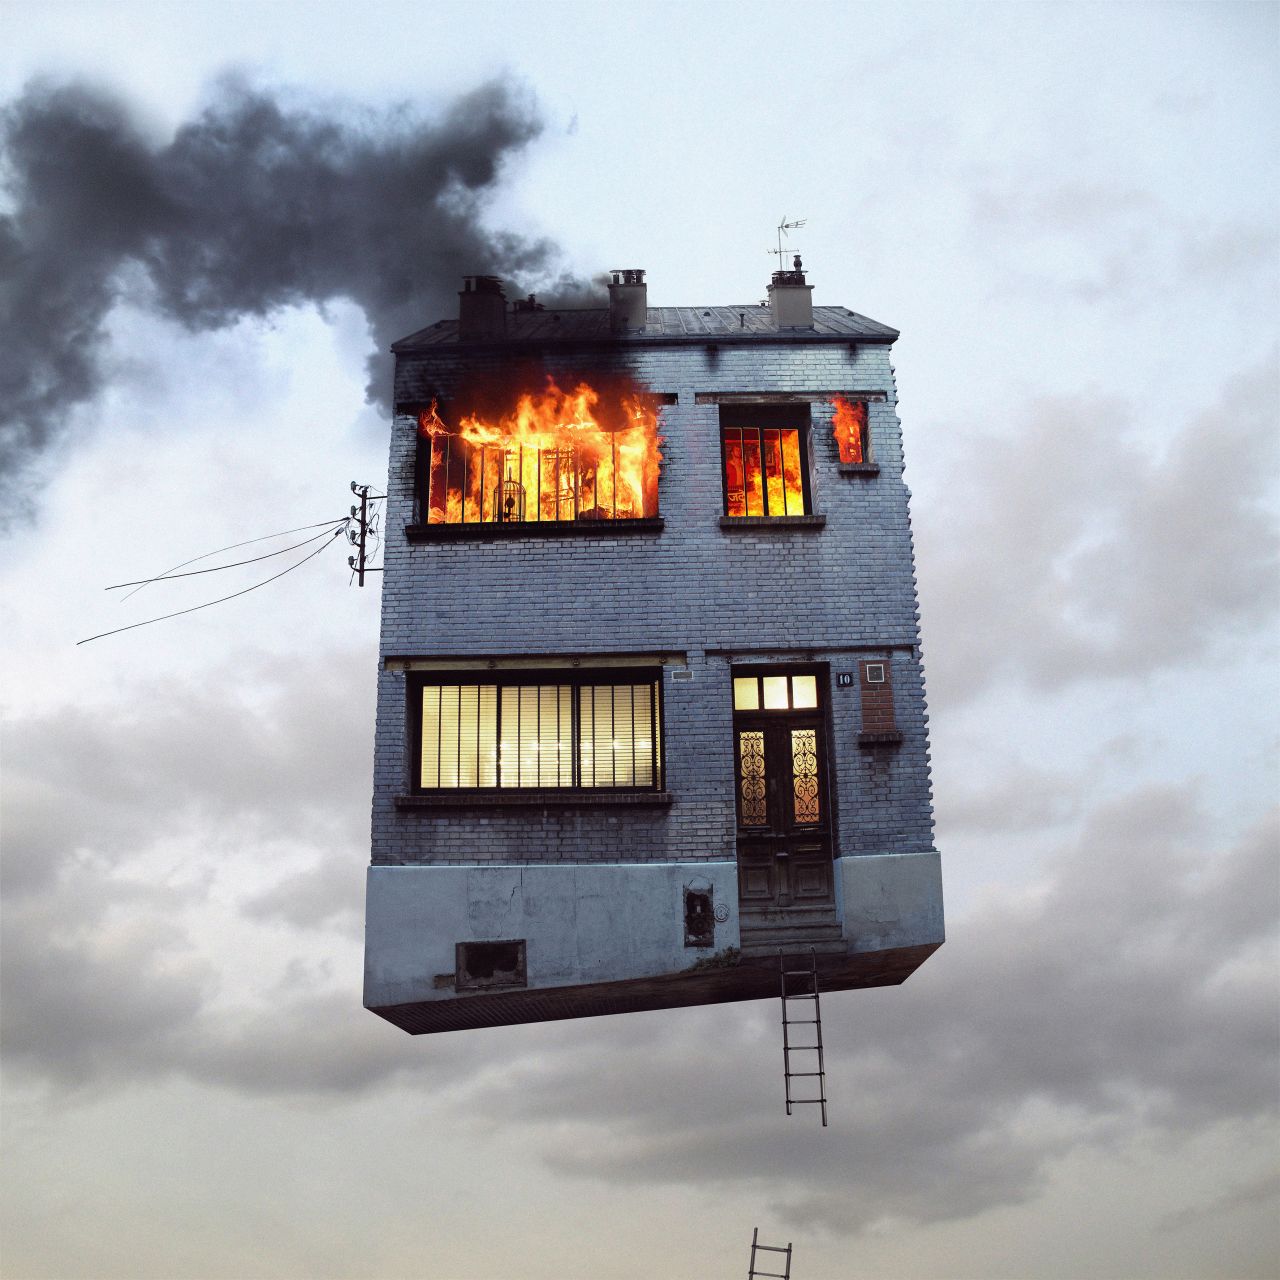 <em>Flying Houses by Laurent Chehere</em><br /><br />Inspired by the world of film and comic books, Laurent Chehere suspends imaginary buildings in the sky -- freeing architecture from its ground roots. The exchange between art and architecture, it seems, is one that inevitably spawns ideas for the new. As global metropolises continue to grow tall and wide, artists are daring to explore what land developers continuously ignore. "The city offers a multitude of creative opportunities for alternative engagements far beyond the conventions of architecture and city planning," says Feireiss.